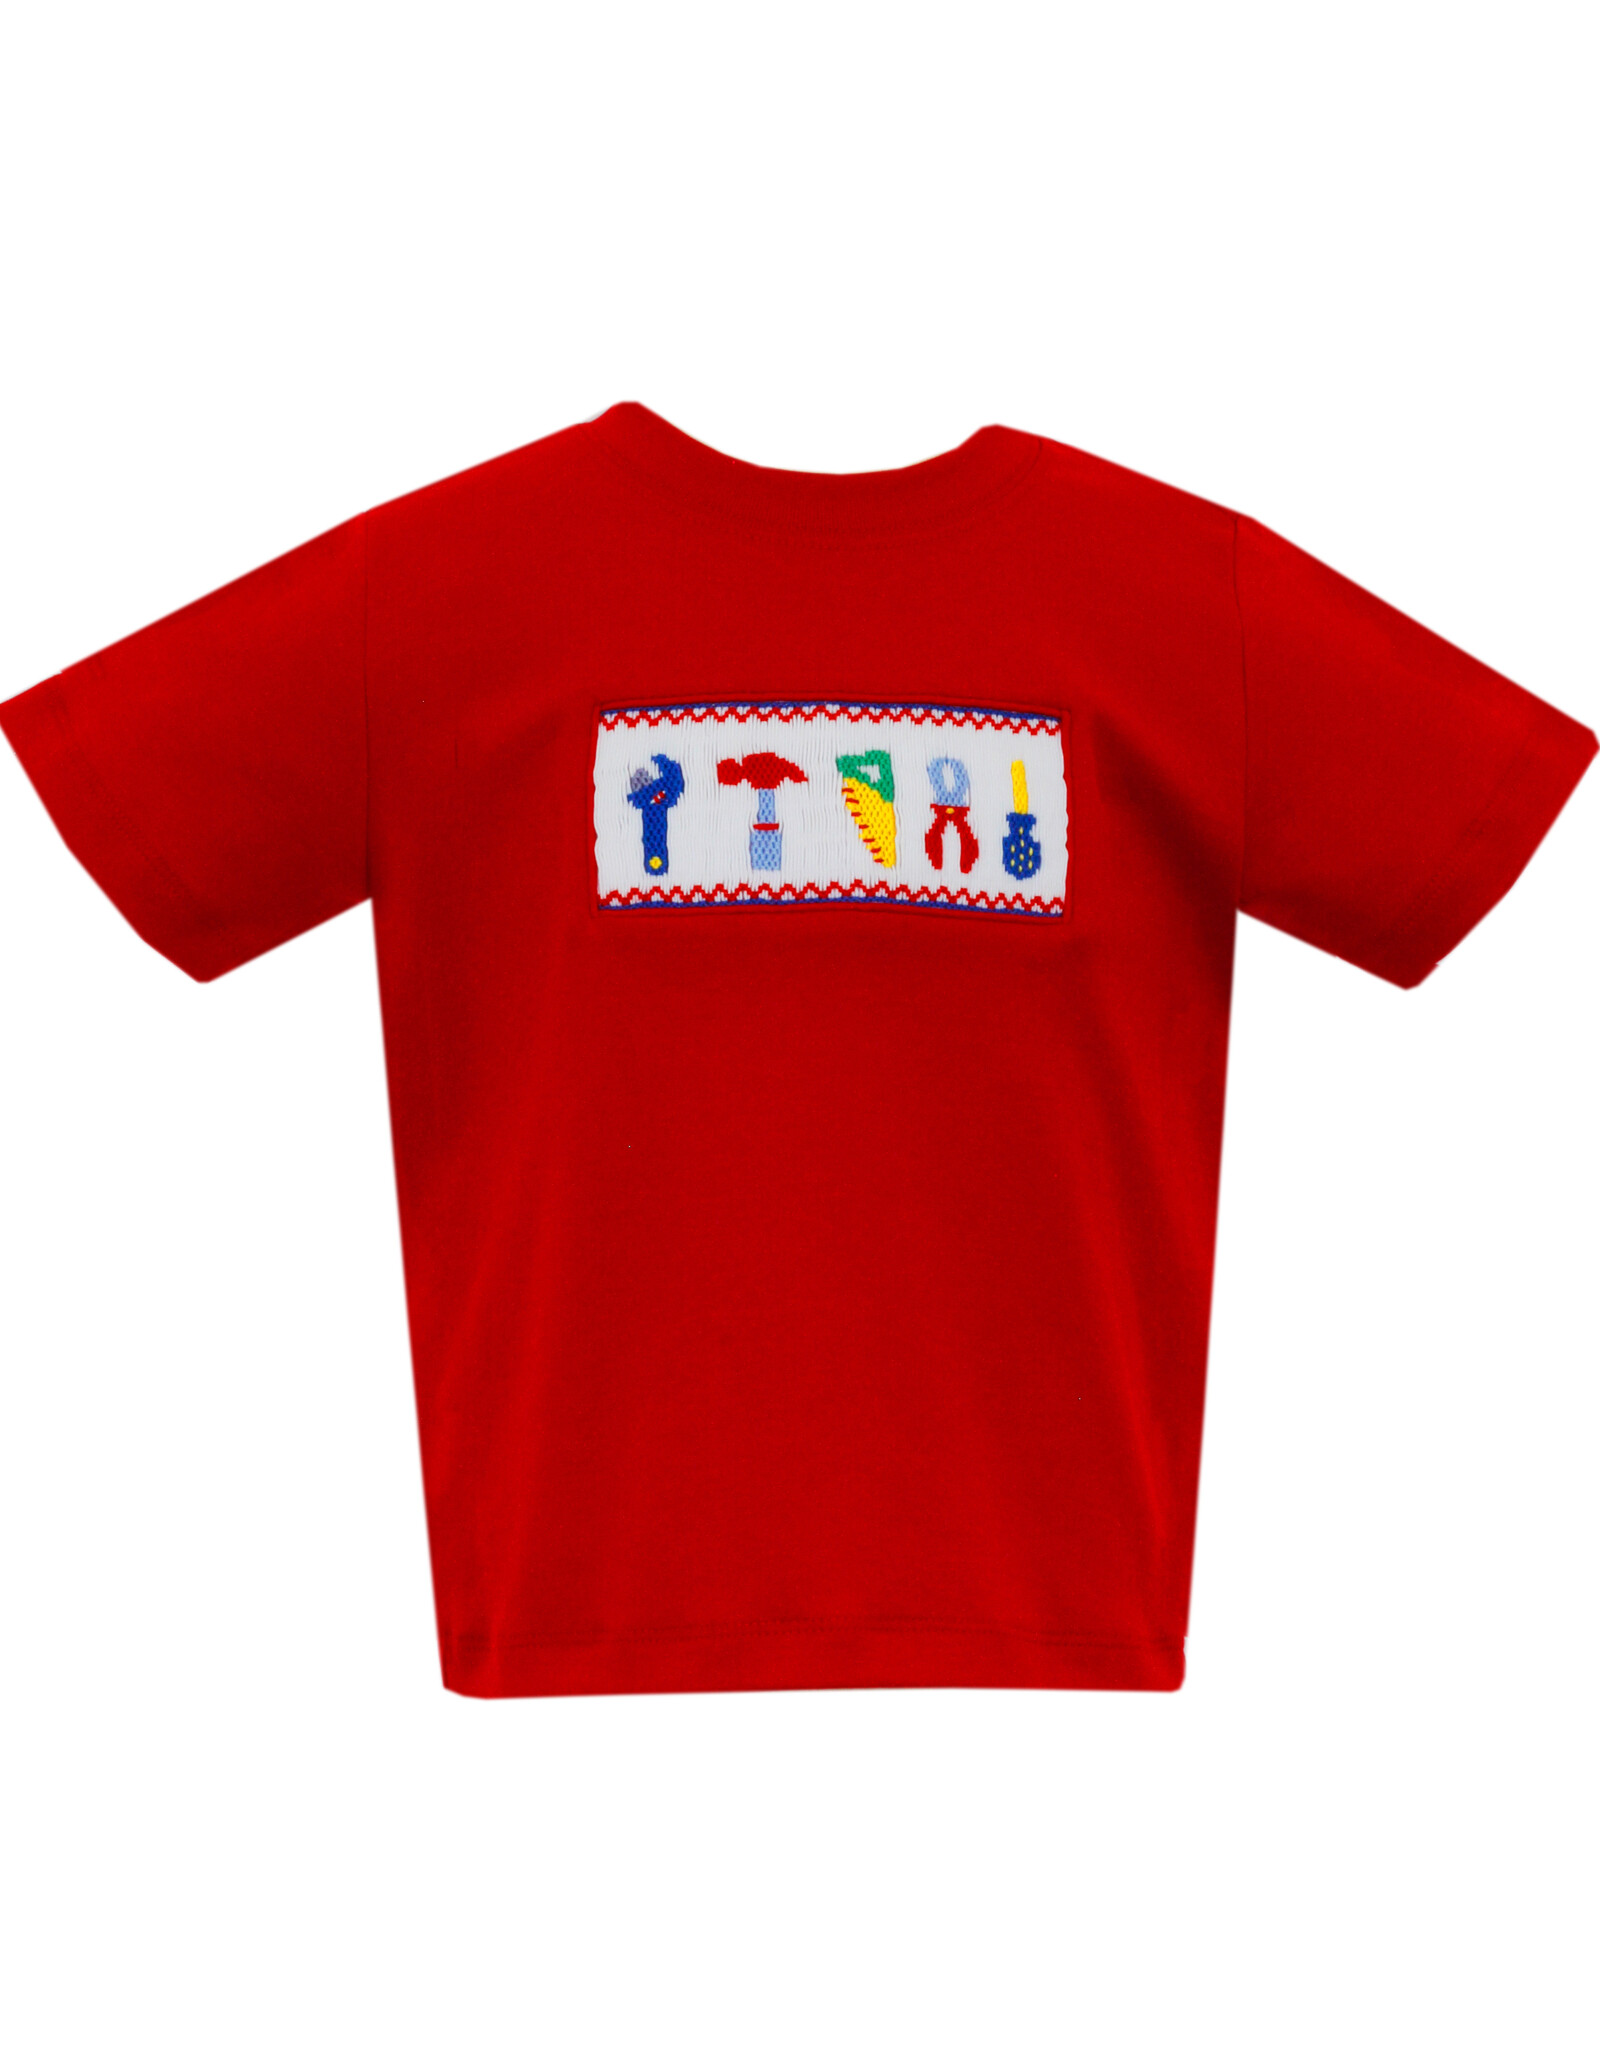 Claire and Charlie Tools Boys T-Shirt